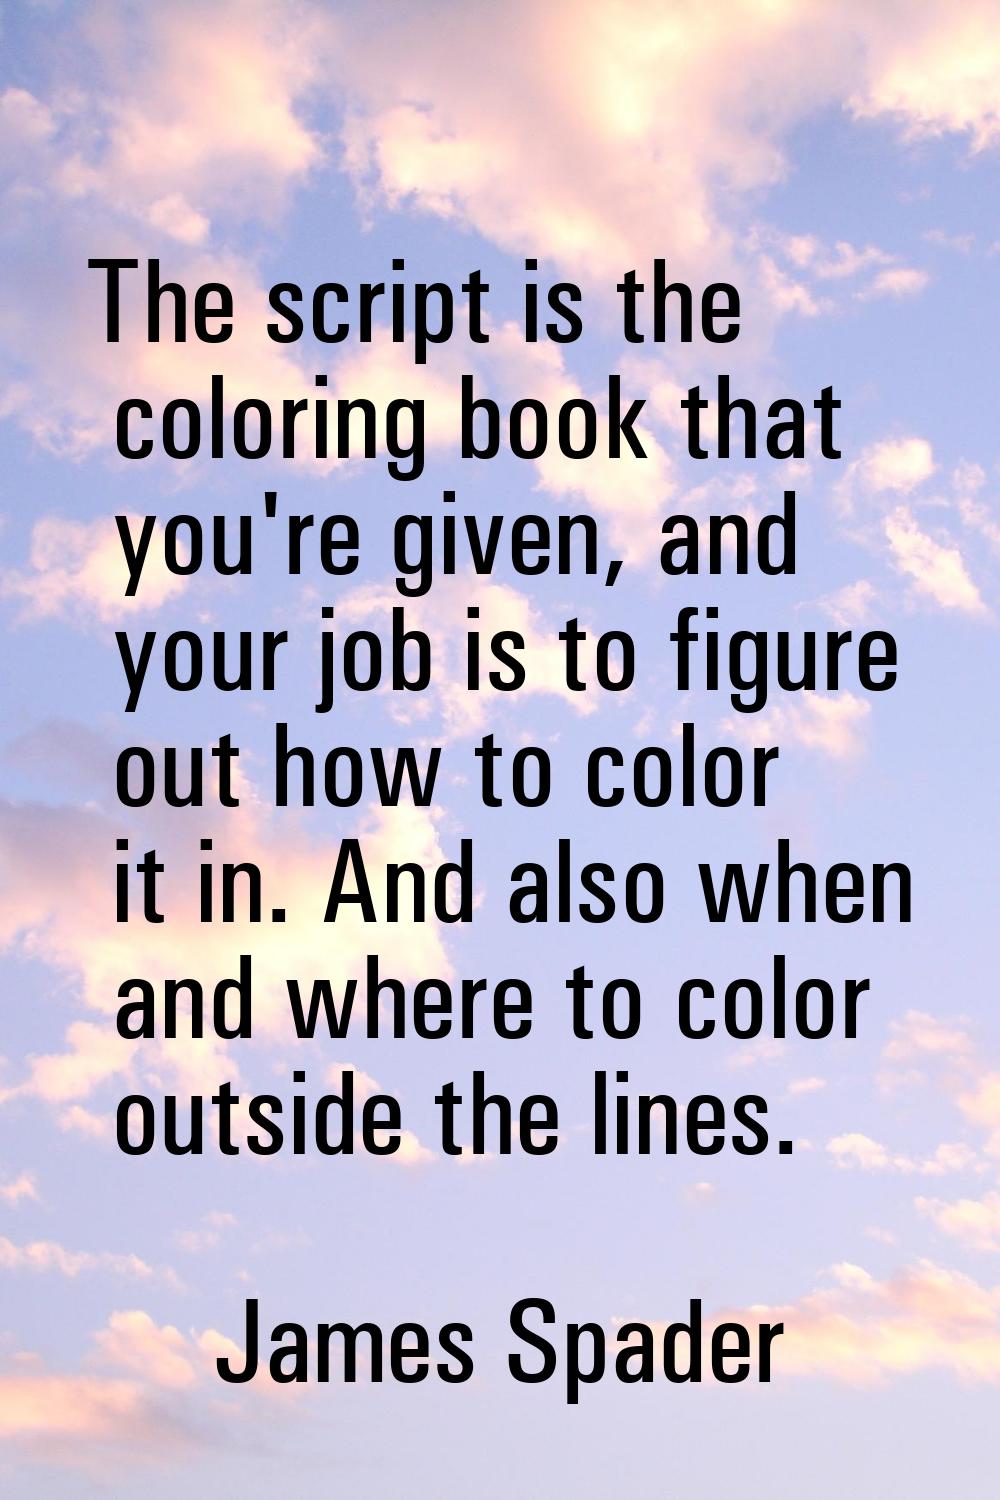 The script is the coloring book that you're given, and your job is to figure out how to color it in